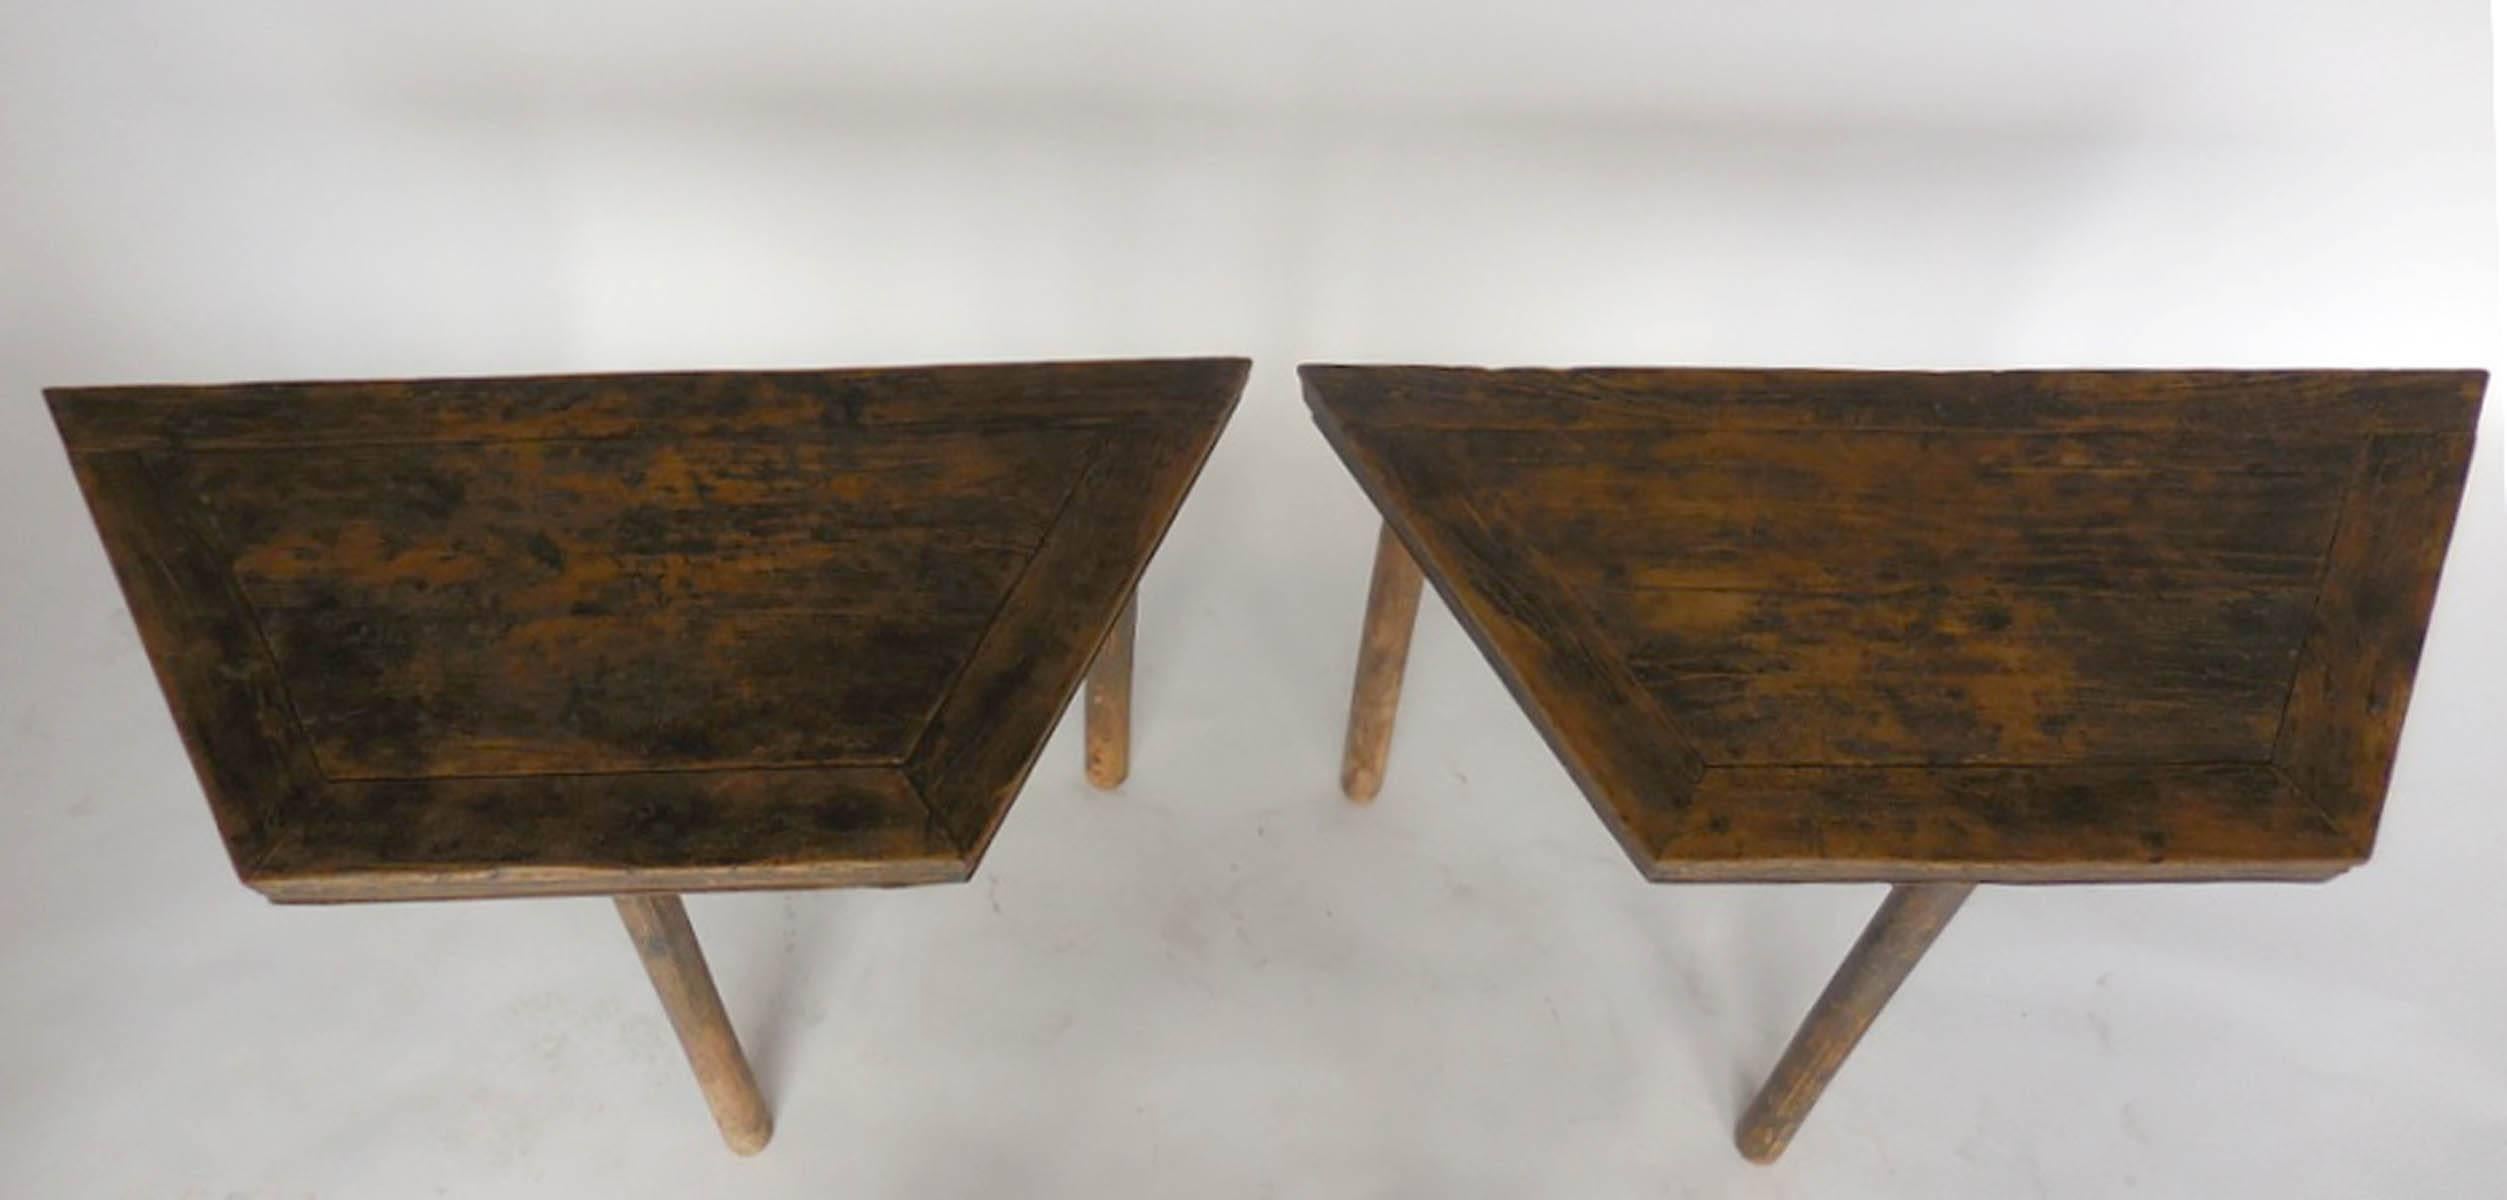 An interesting pair of framed top demilunes! They can form, a par of four-sided demilune tables, an hexagonal table when put together, a console when placed side of side or a corner piece when placed together at an angle. 
Beautiful elmwood with